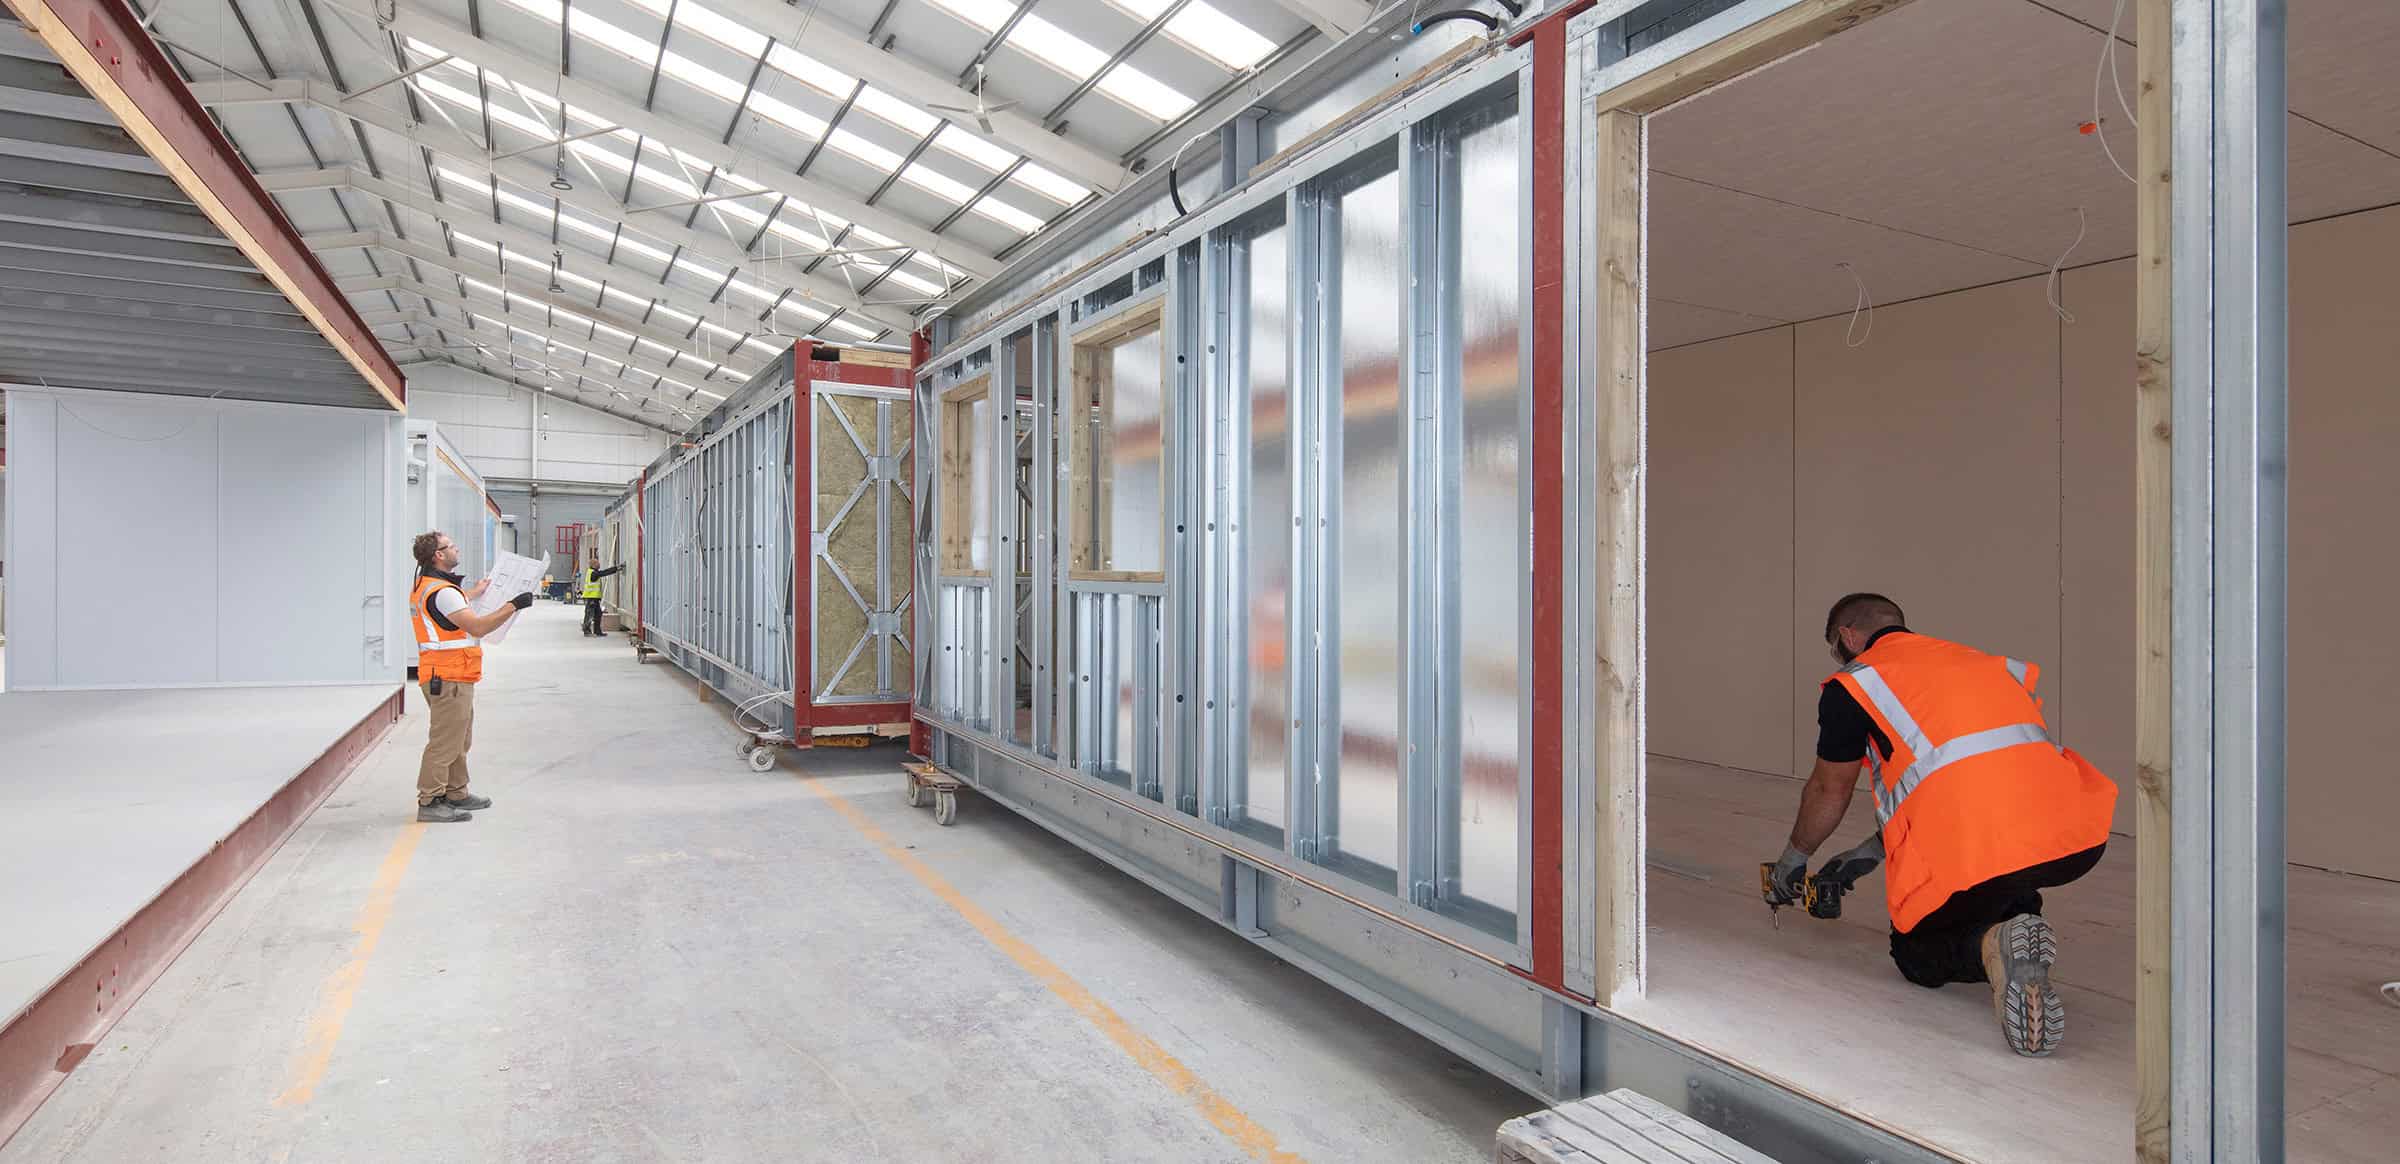 Temporary modular buildings being created offsite in a factory. 2 workers, one inside a modular unit drilling the floor, one stood looking at the plans. 